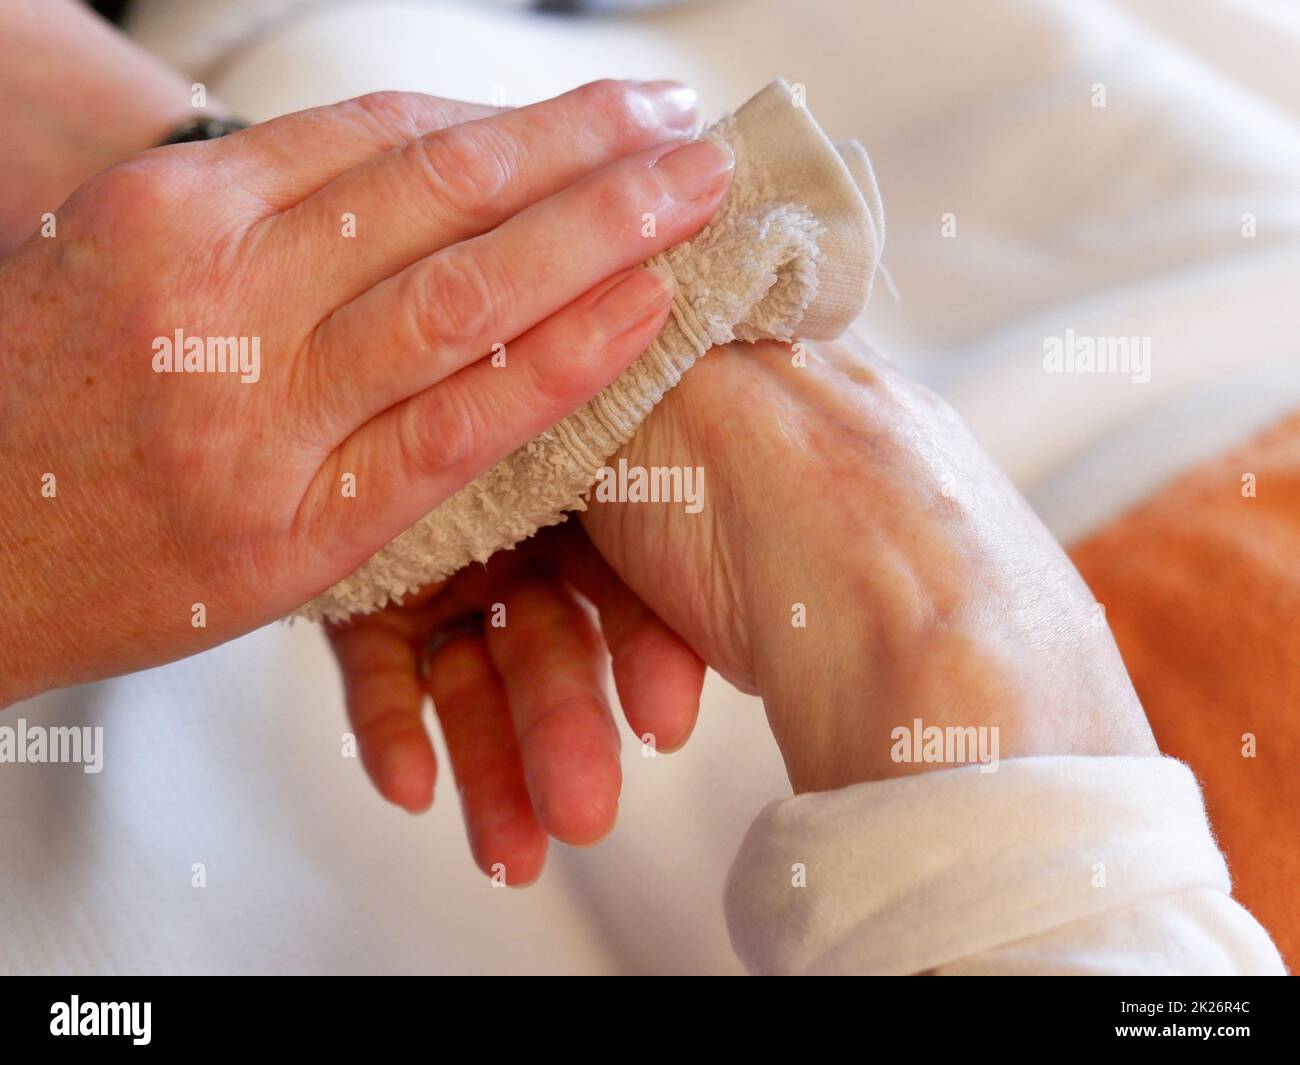 Helping Hands Stock Photo